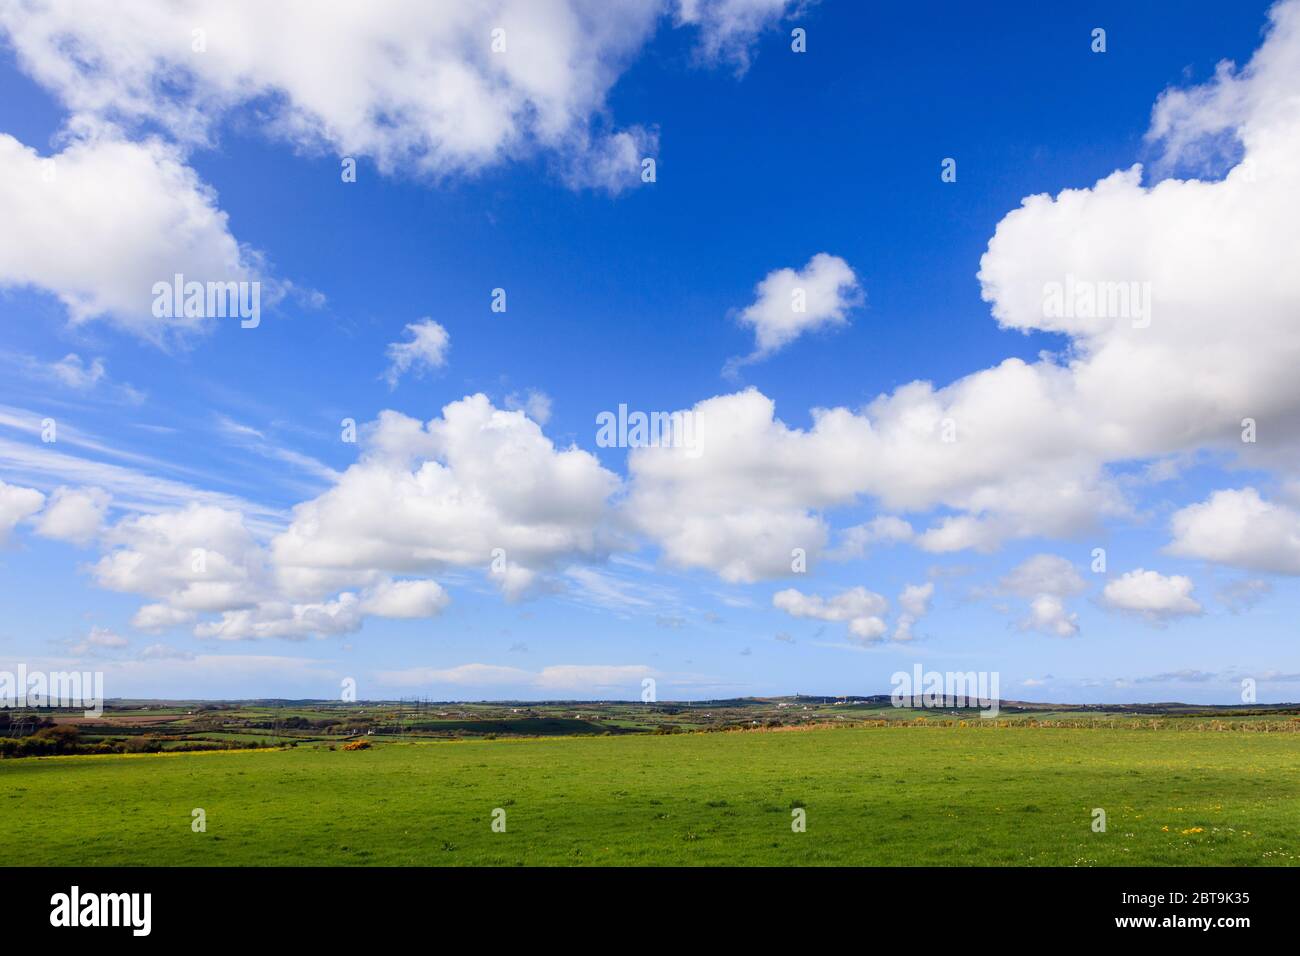 Blue sky skyscape with fluffy white clouds scudding across green countryside in a rural country landscape. Isle of Anglesey, north Wales, UK, Britain Stock Photo